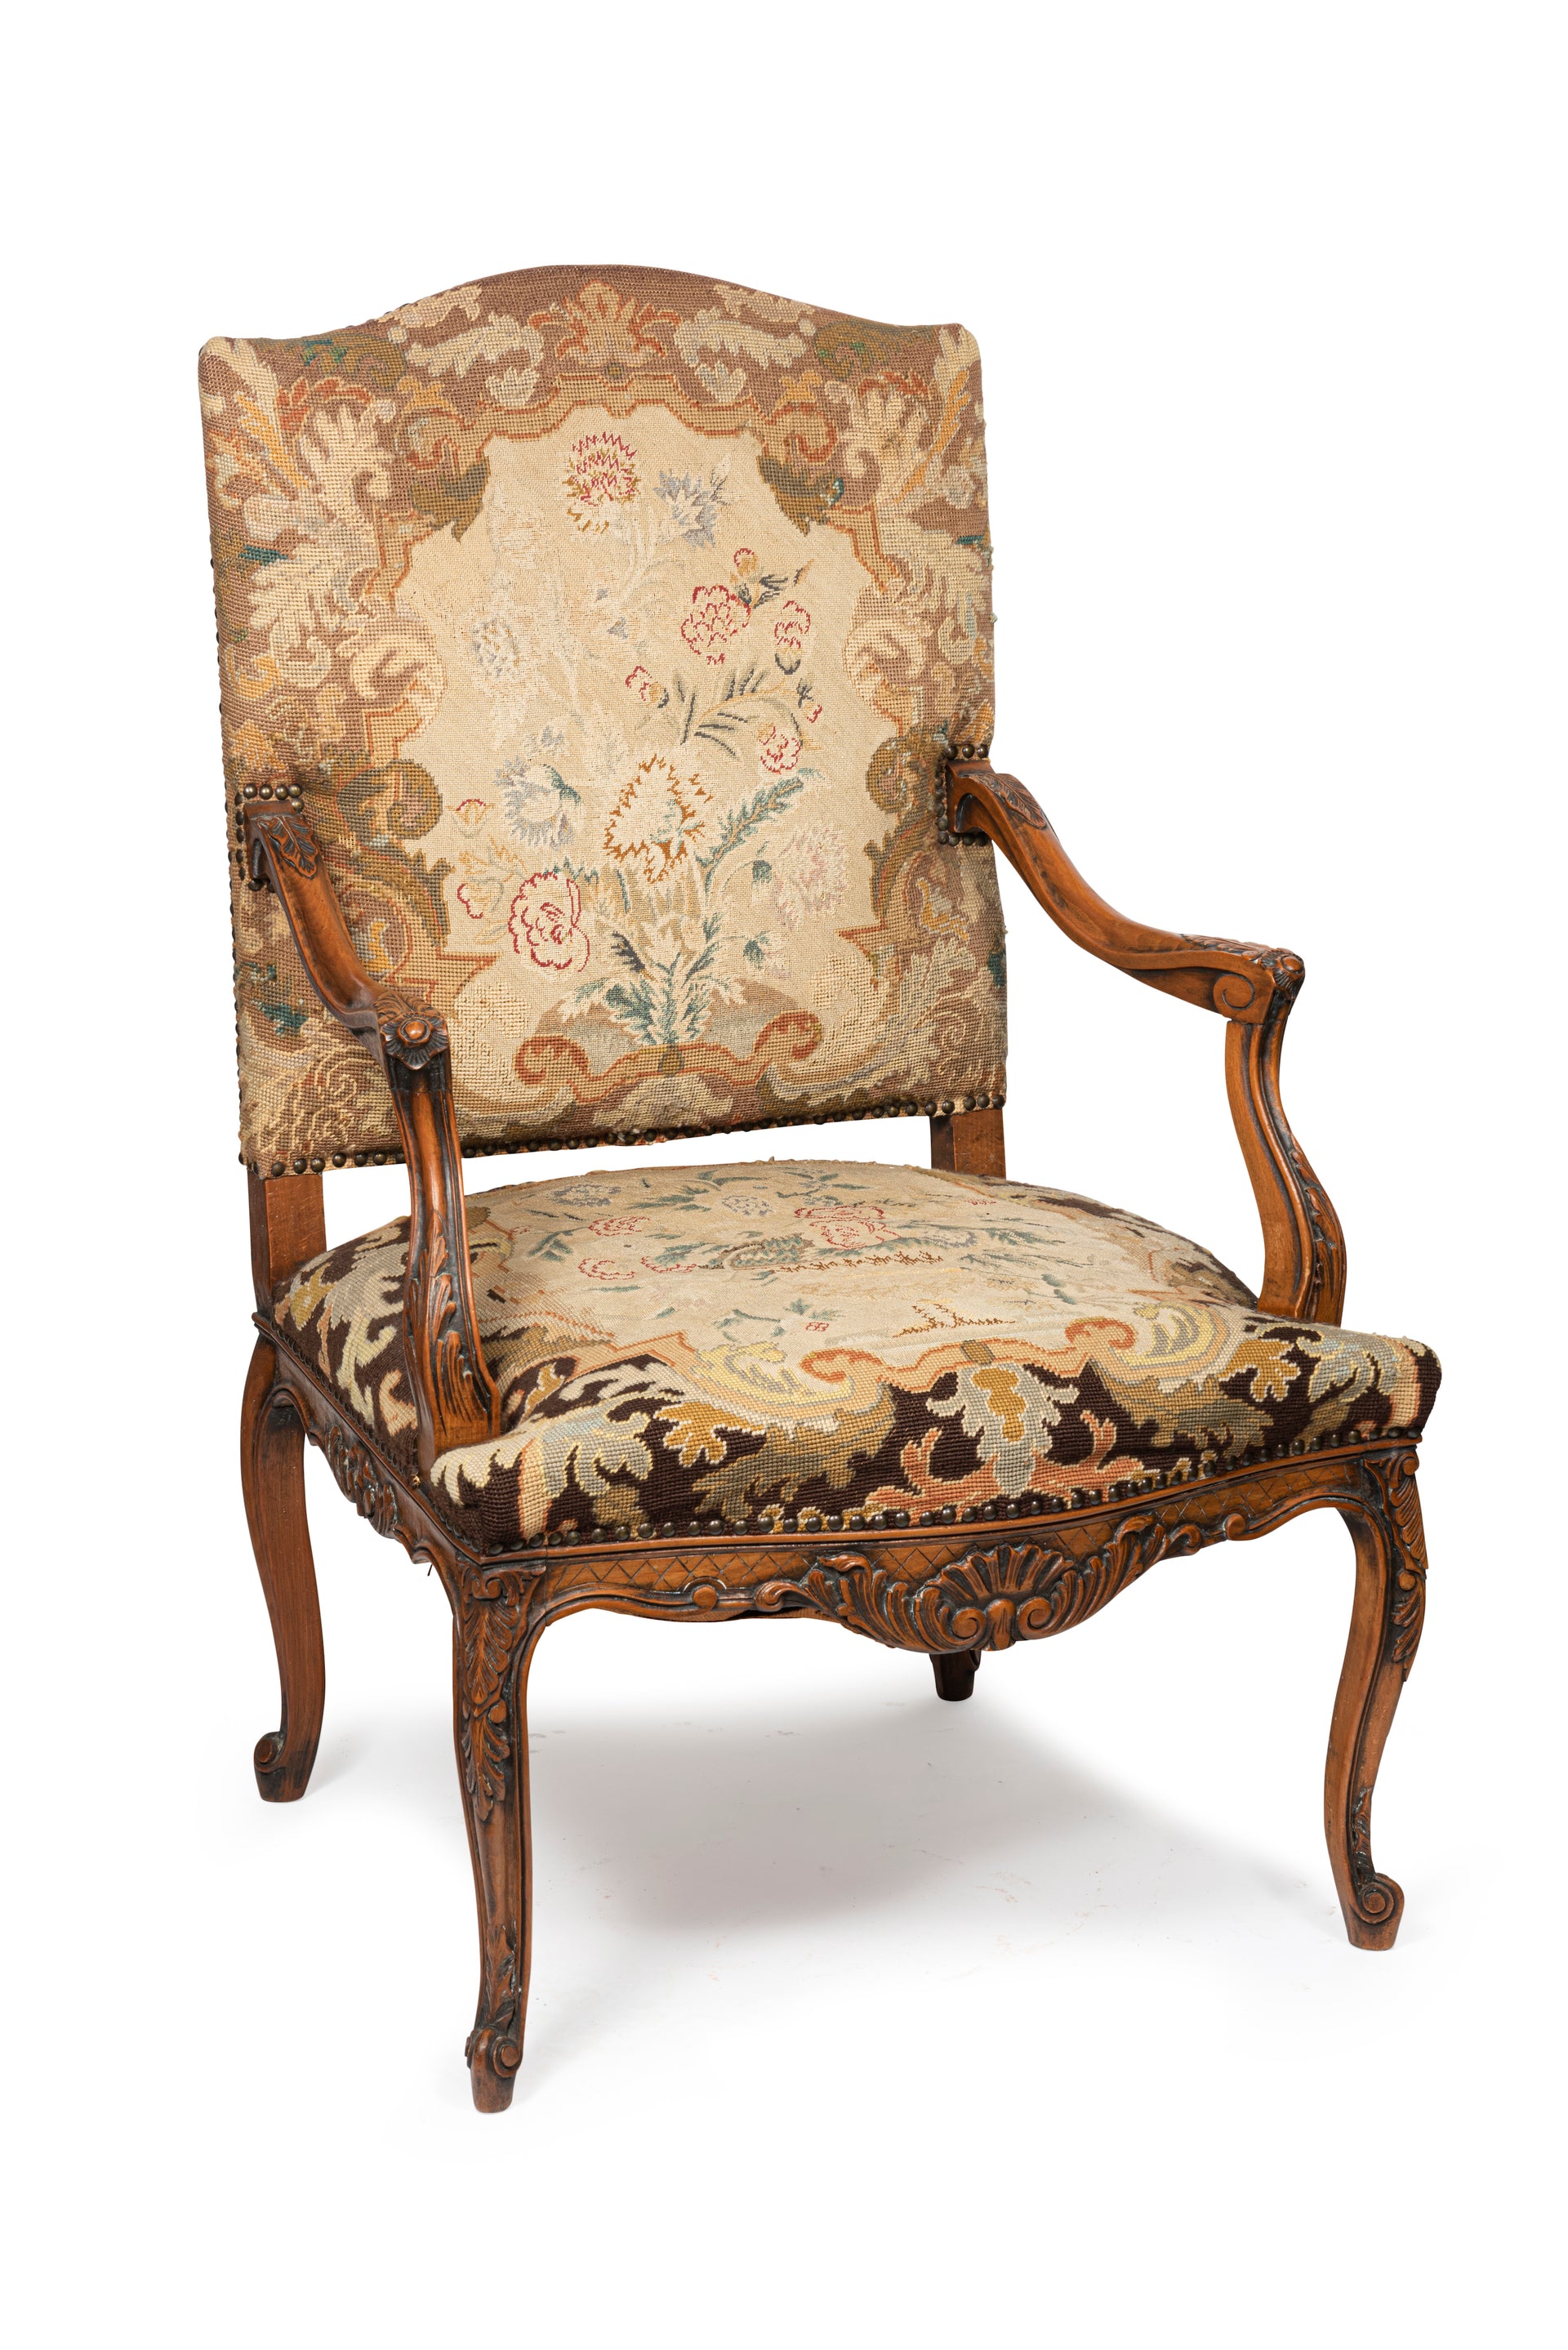 SOLD A Louis XV style carved walnut fauteuil, French 19th Century